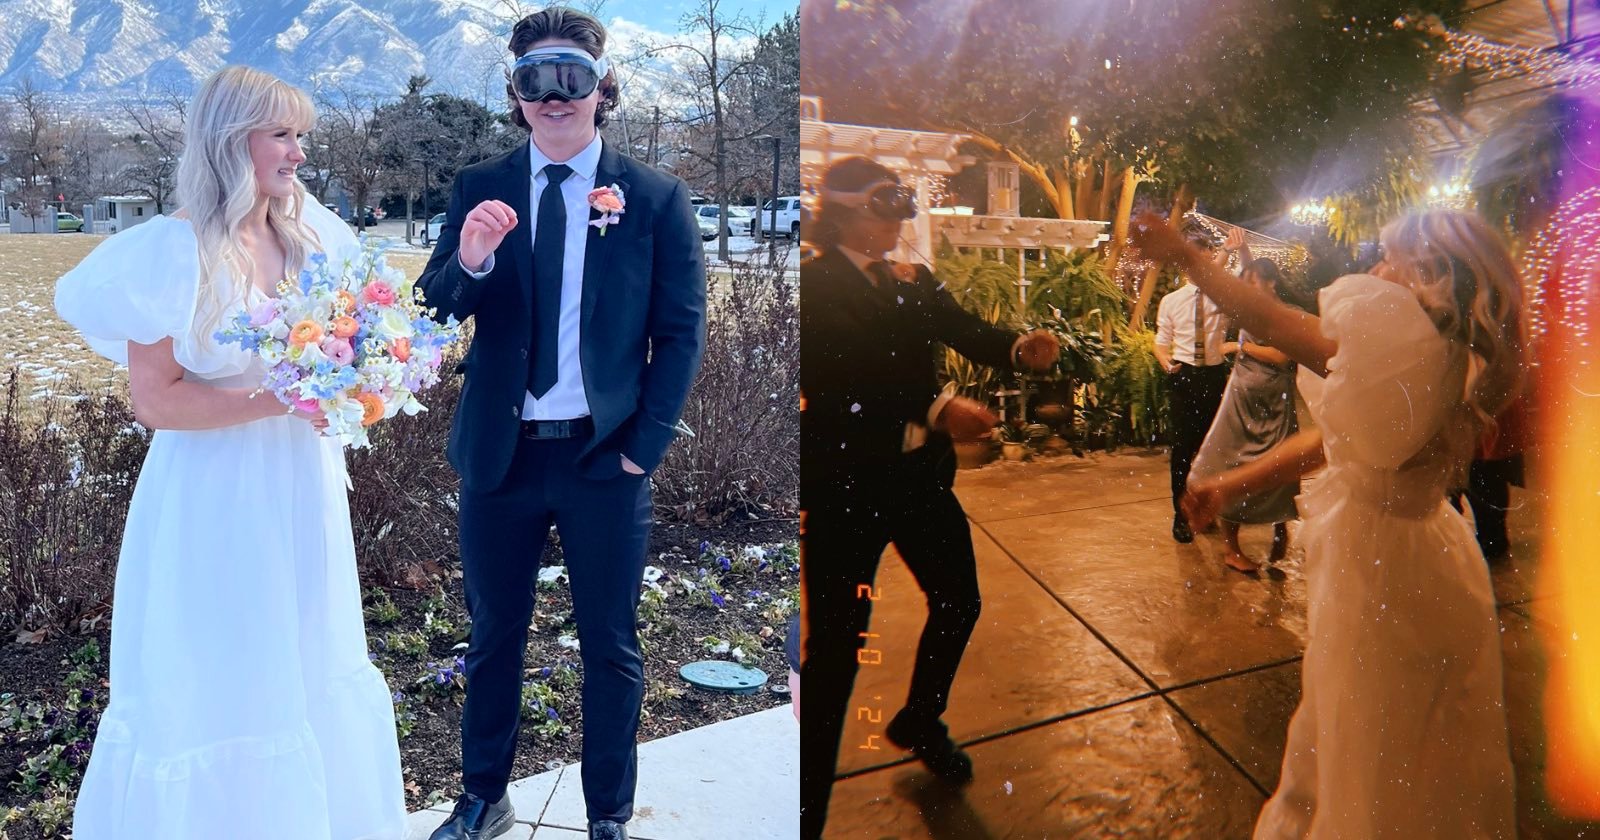 Tech-Savvy Groom Turns Heads by Wearing Apple’s Vision Pro Headset on Wedding Day